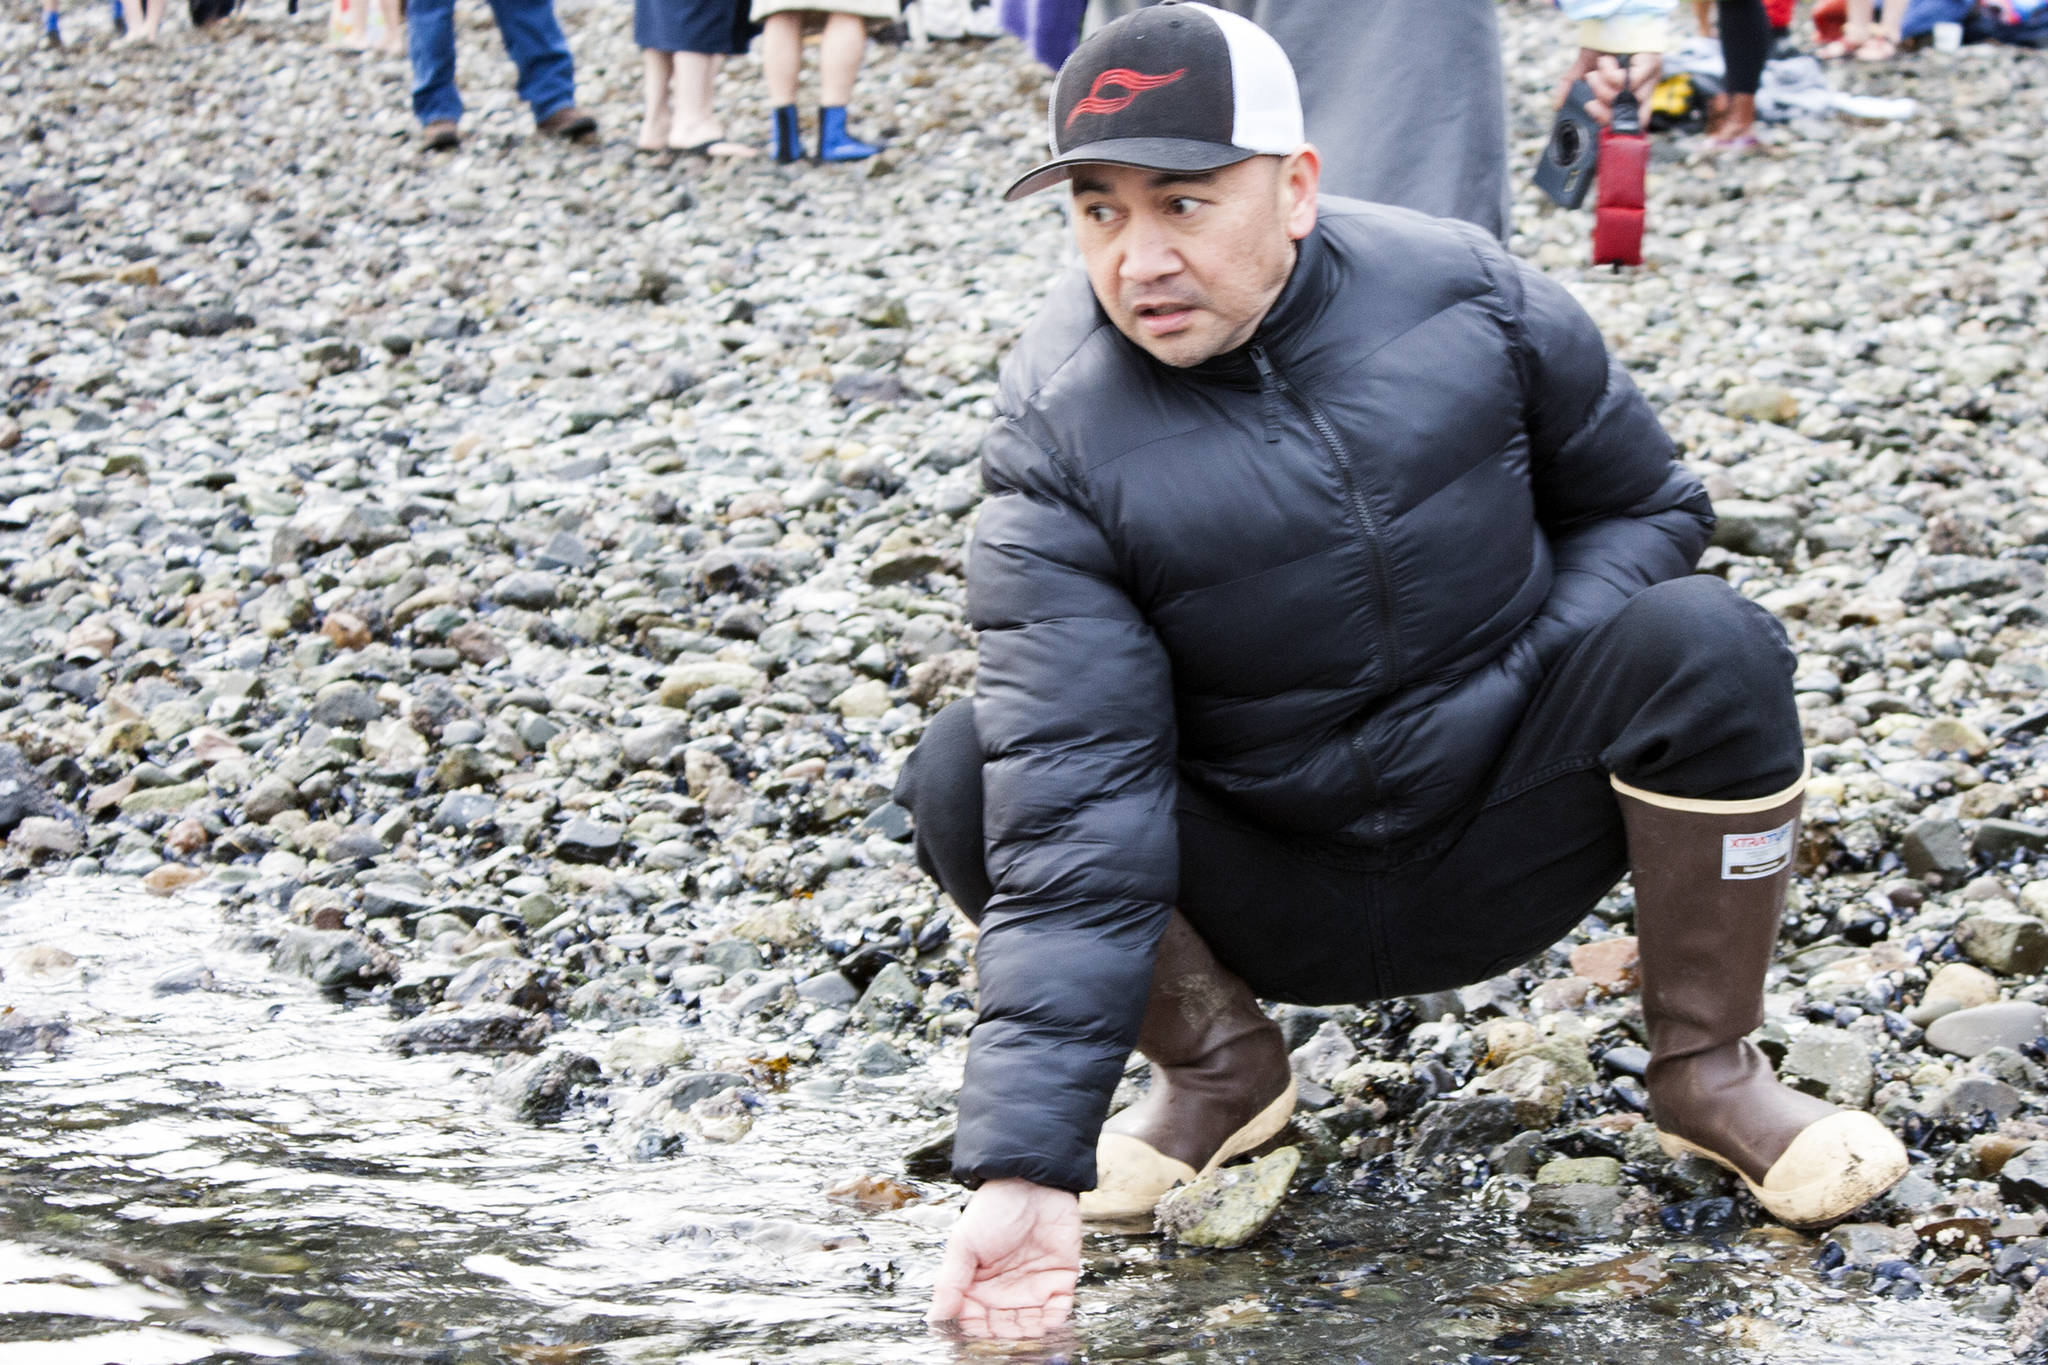 Ionel Casulucan checks the temperature of the water at Auke Bay Recreation Area on Wednesday, Jan. 1, before the 2020 Polar Dip. (Ben Hohenstatt | Juneau Empire)